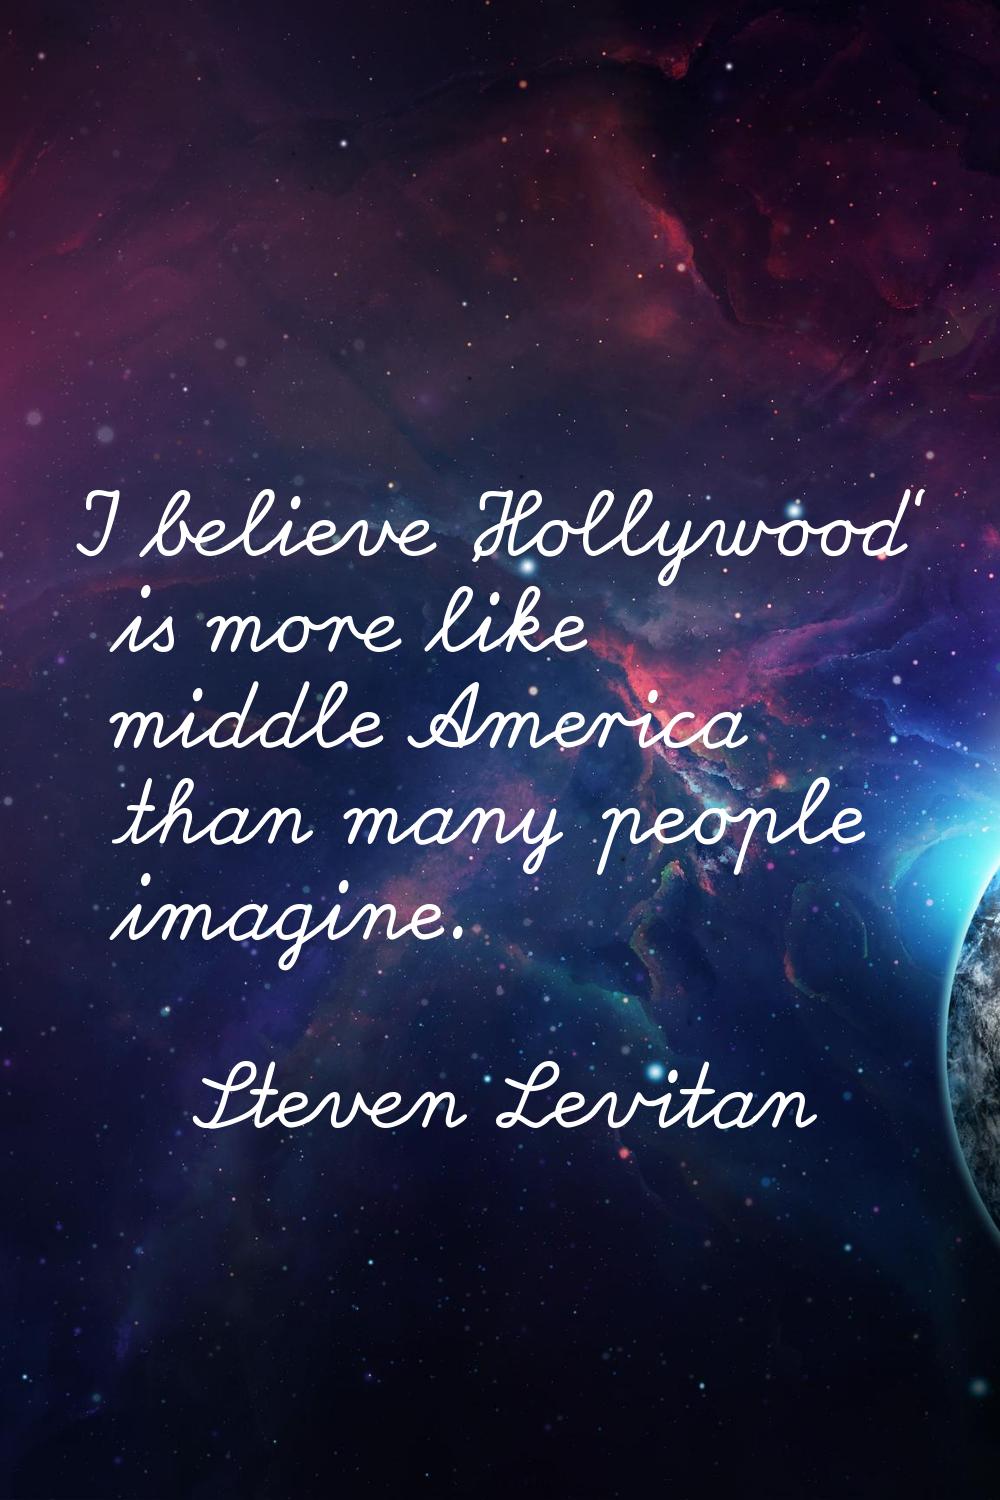 I believe 'Hollywood' is more like middle America than many people imagine.